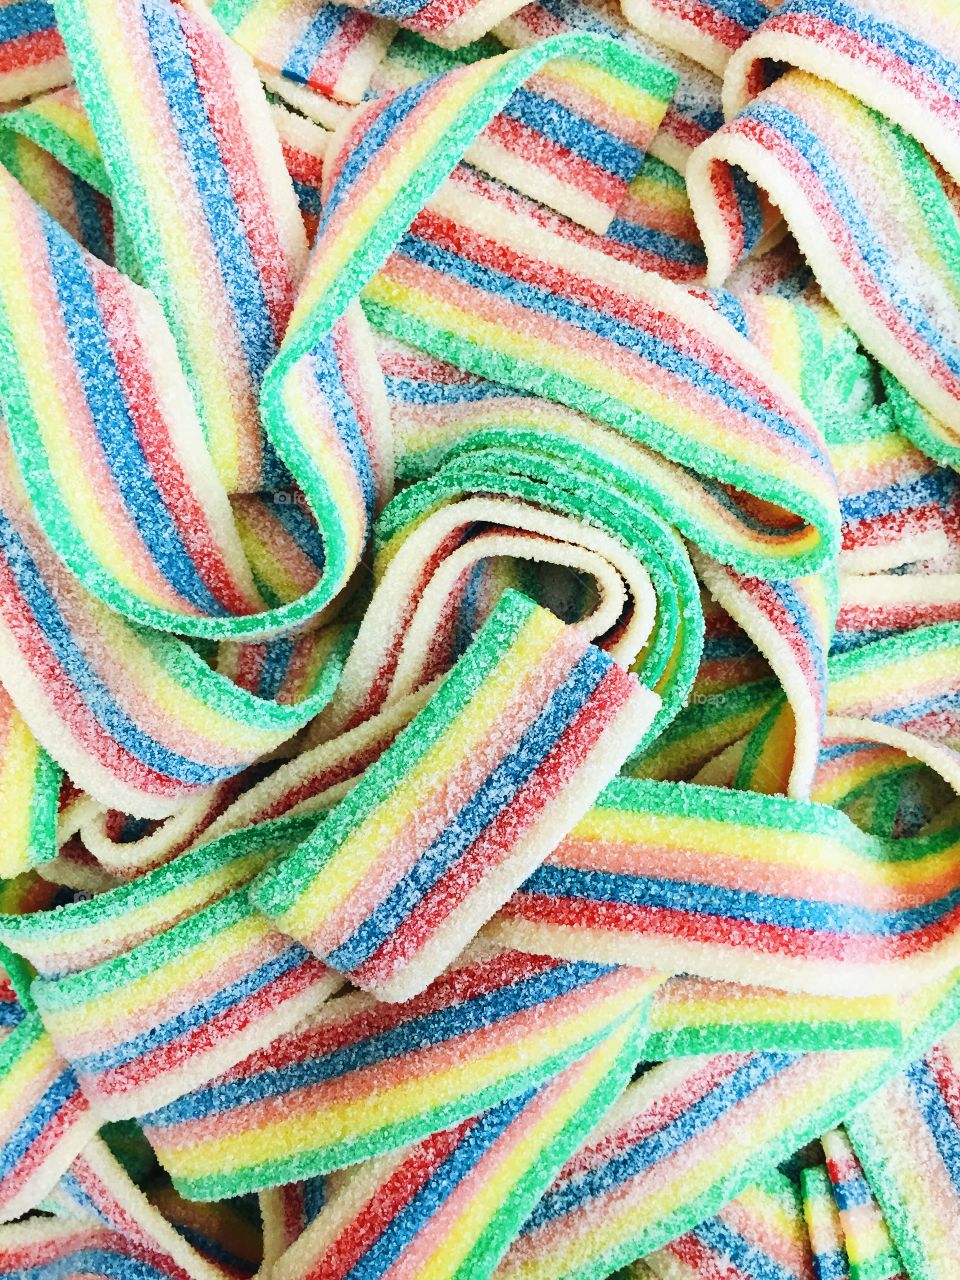 Multicolored background of colorful candies